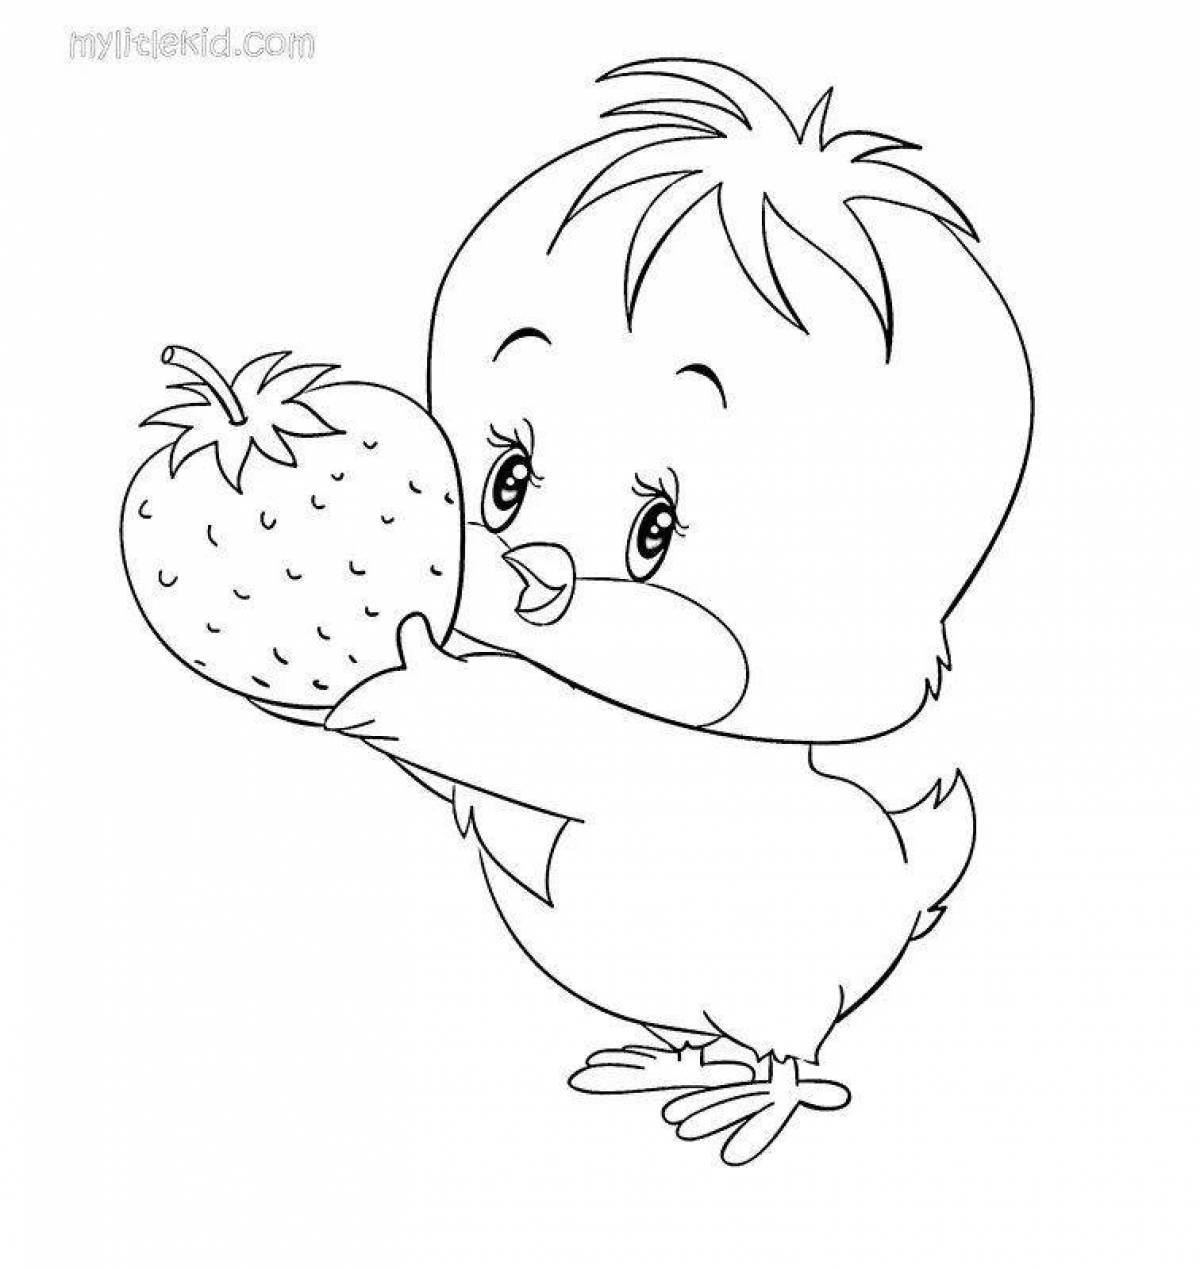 Cute chick coloring book for 4-5 year olds